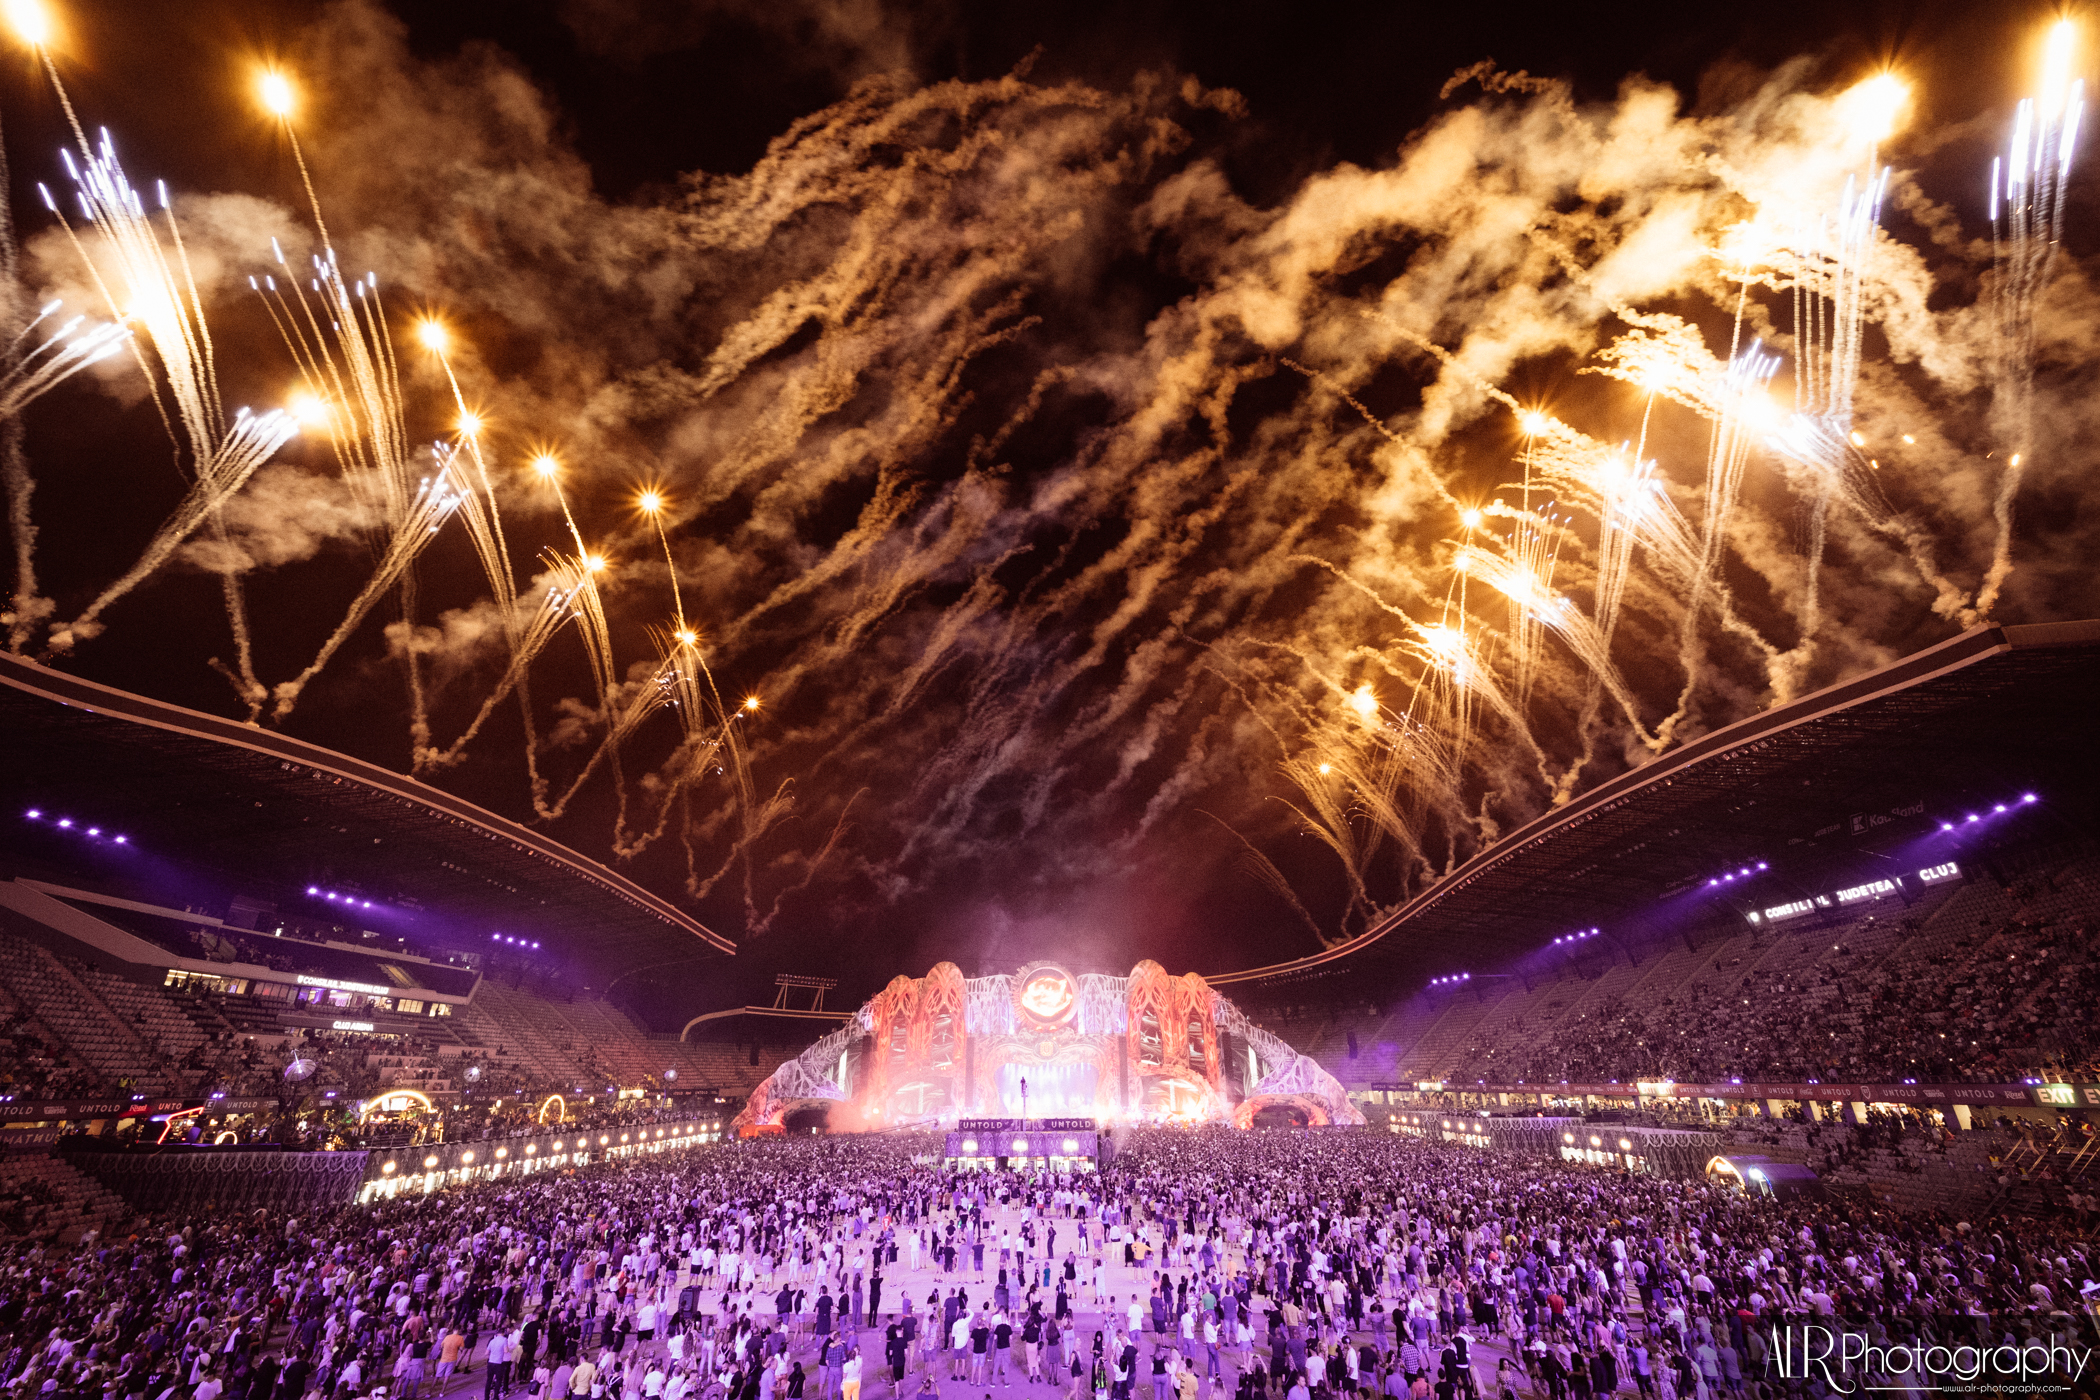 Over 360,000 attended the 4 nights of UNTOLD 2022 - Cluj XYZ